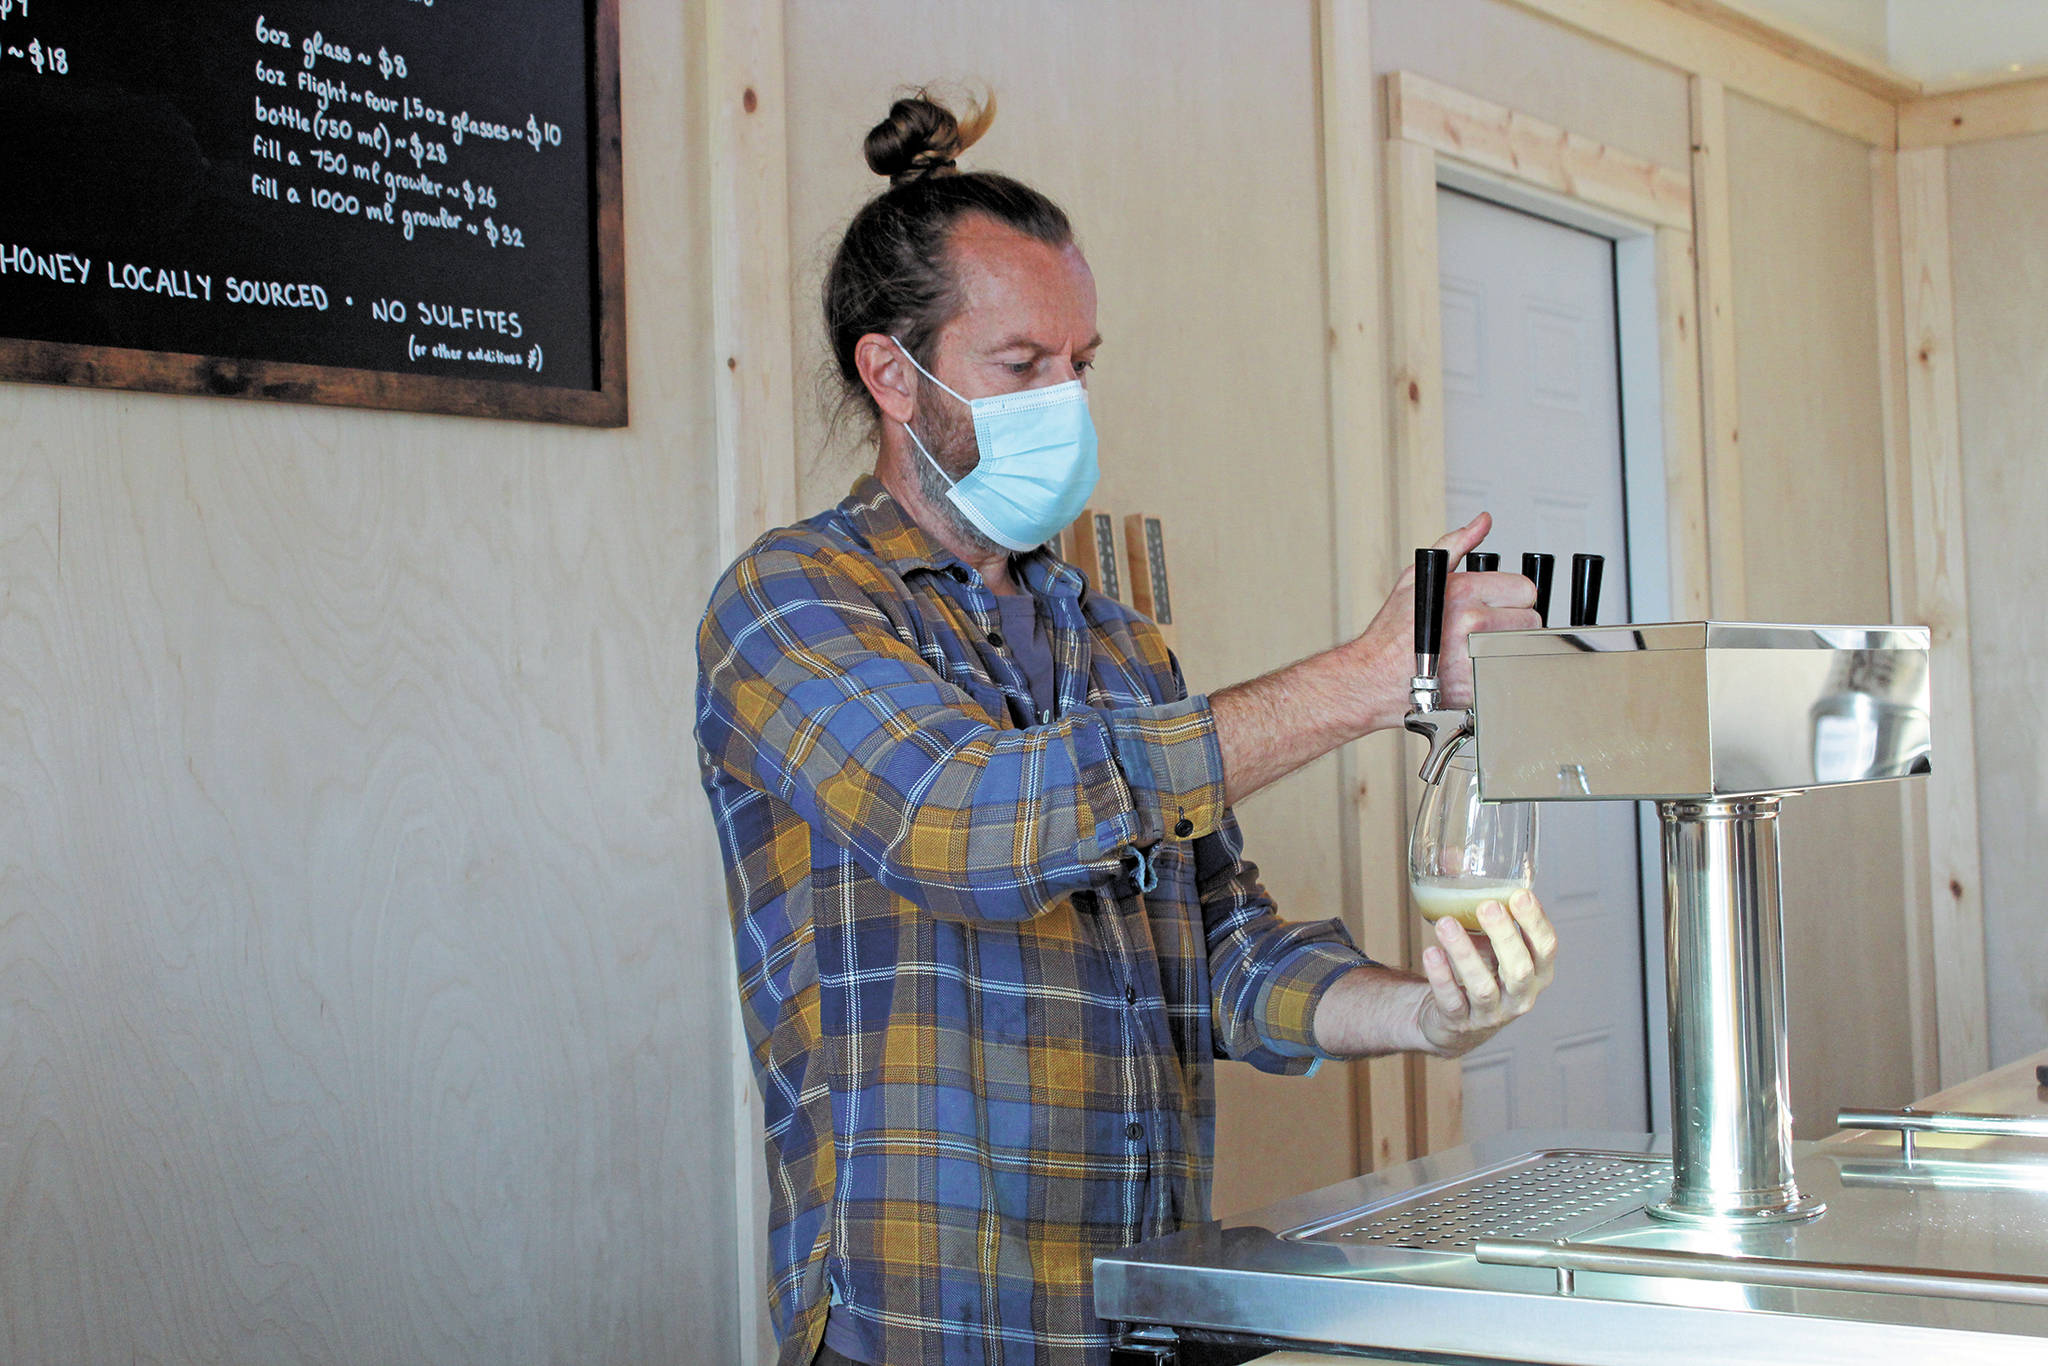 Jason Davis, owner of Sweetgale Meadworks and Cider House, pours a drink for a patron on Oct. 20, 2020 at the new business on Main Street in Homer, Alaska. (Photo by Megan Pacer/Homer News)